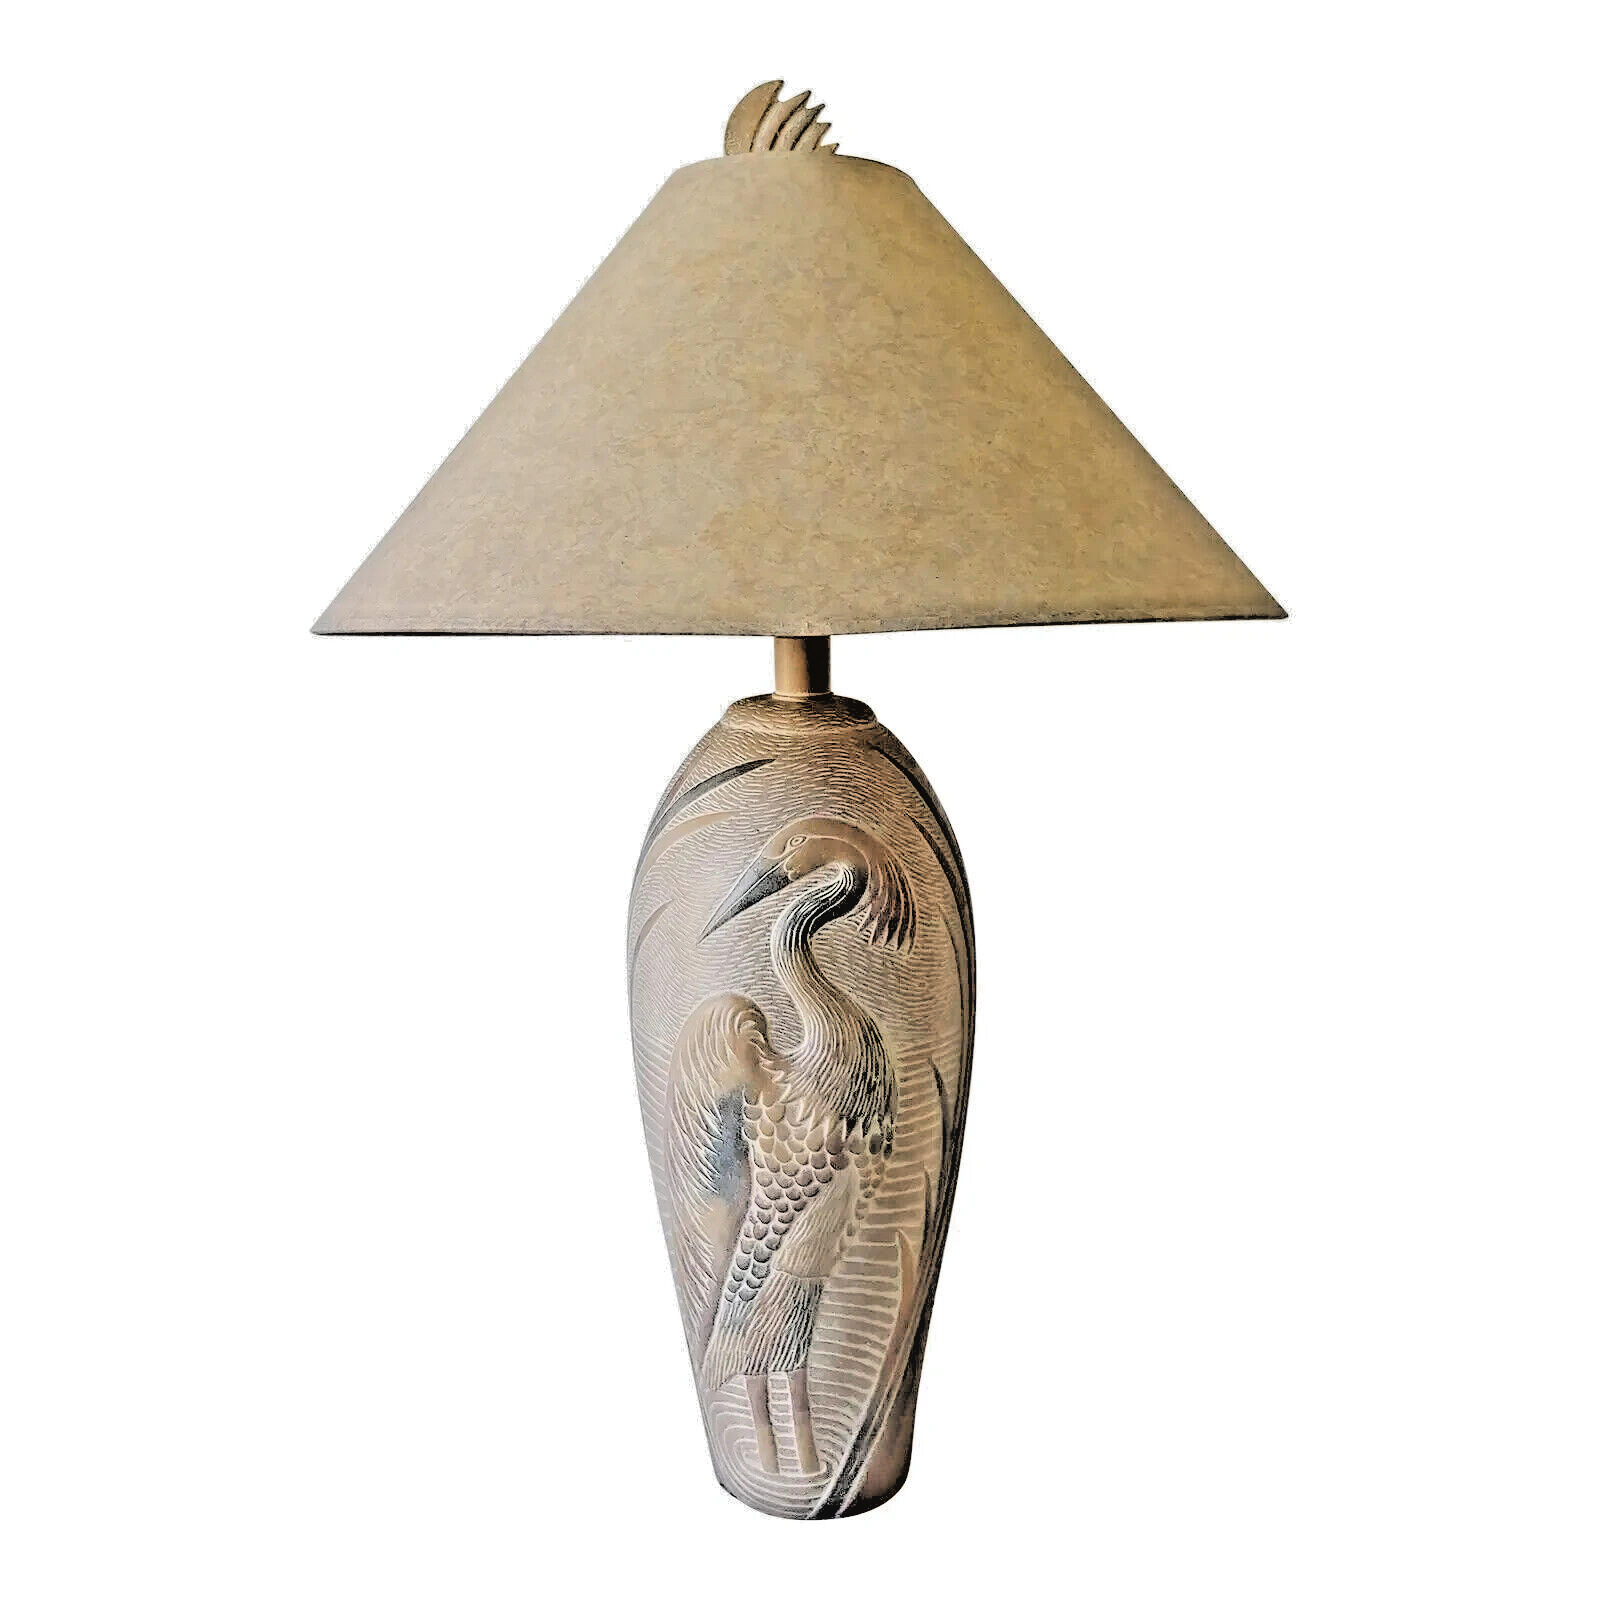 Large resin lamp with Herons 1980s